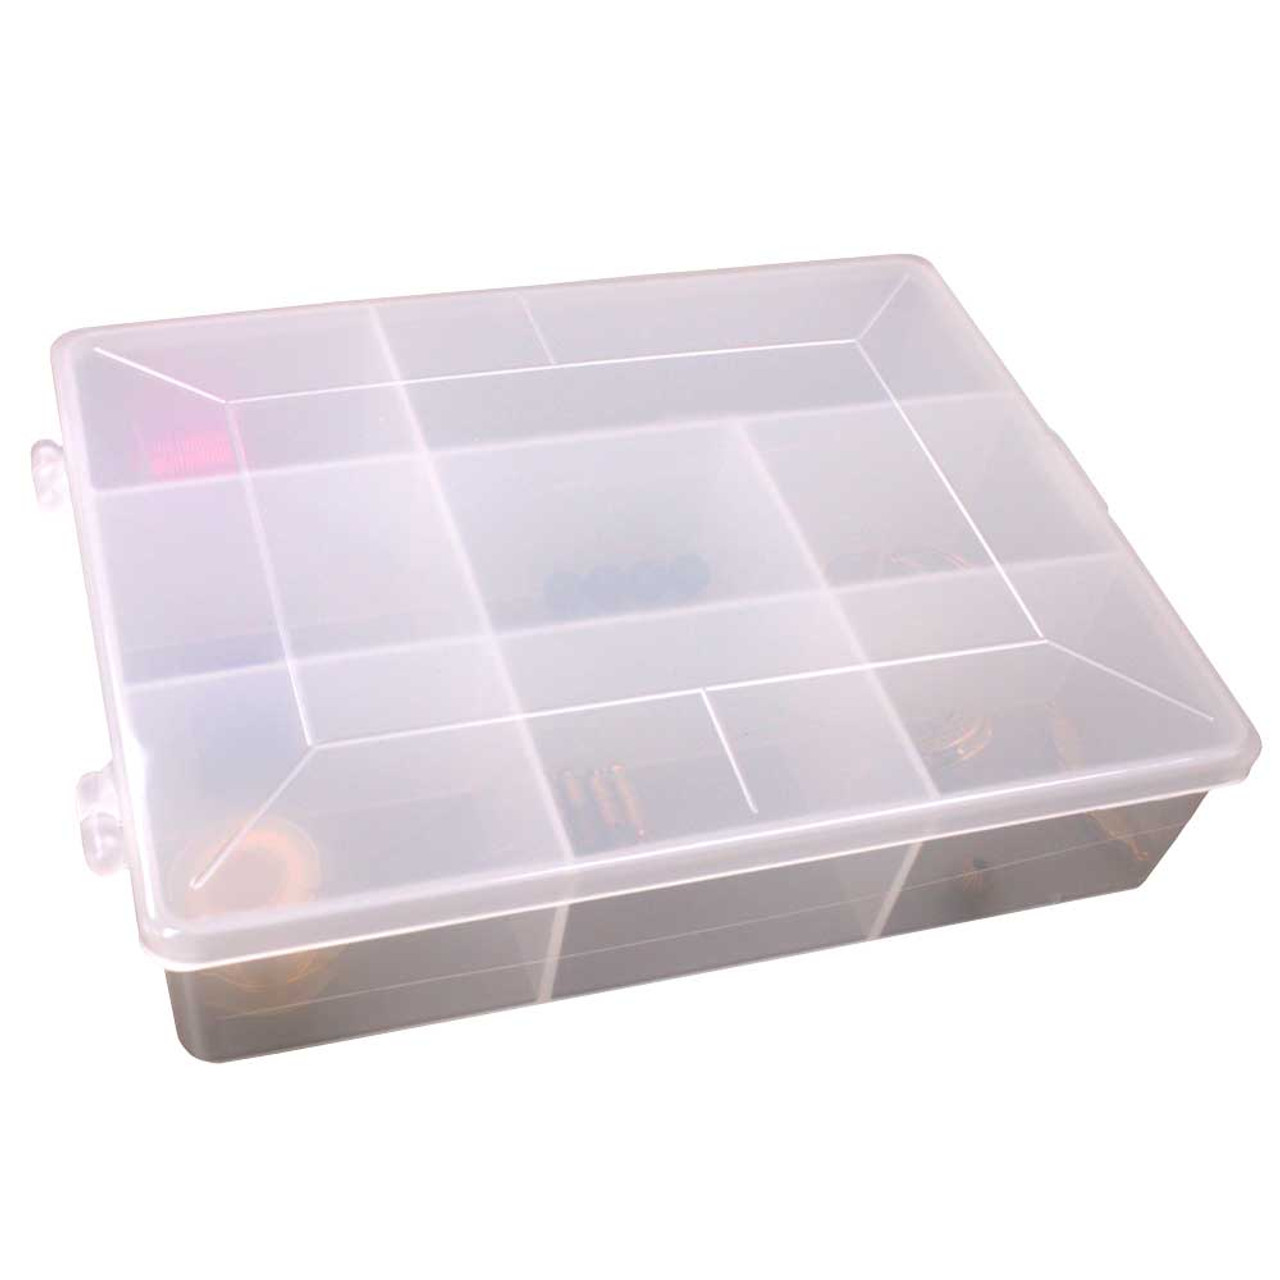 https://cdn11.bigcommerce.com/s-iic0hc/images/stencil/1280x1280/products/48559/88056/8-compartment-storage-box-15.601__00822.1659442898.jpg?c=2